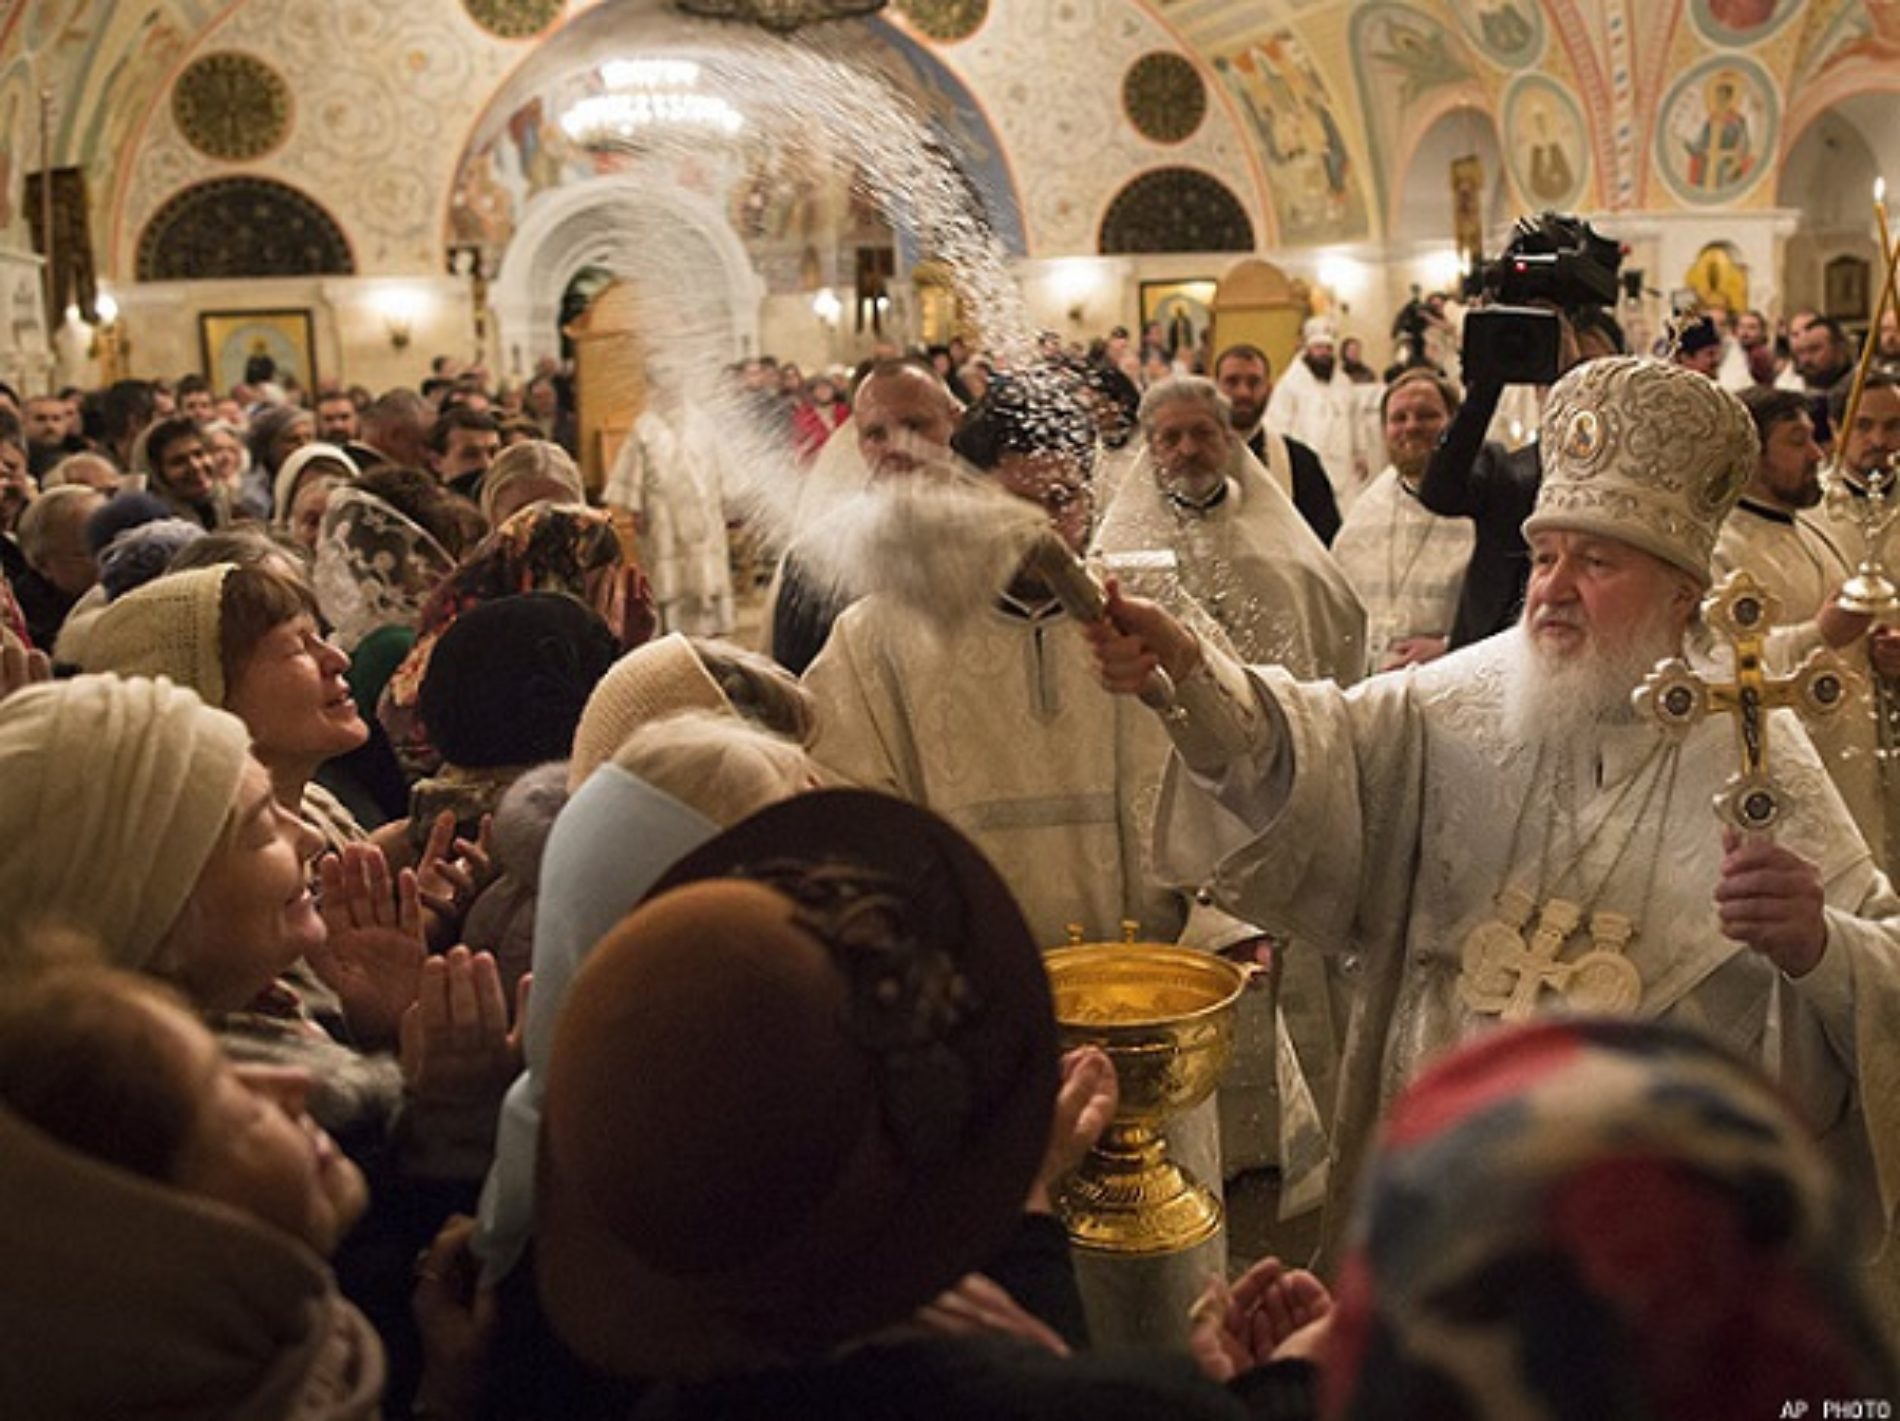 Head of Russian Orthodox Church Says Gays Are Responsible for Rise of ISIS